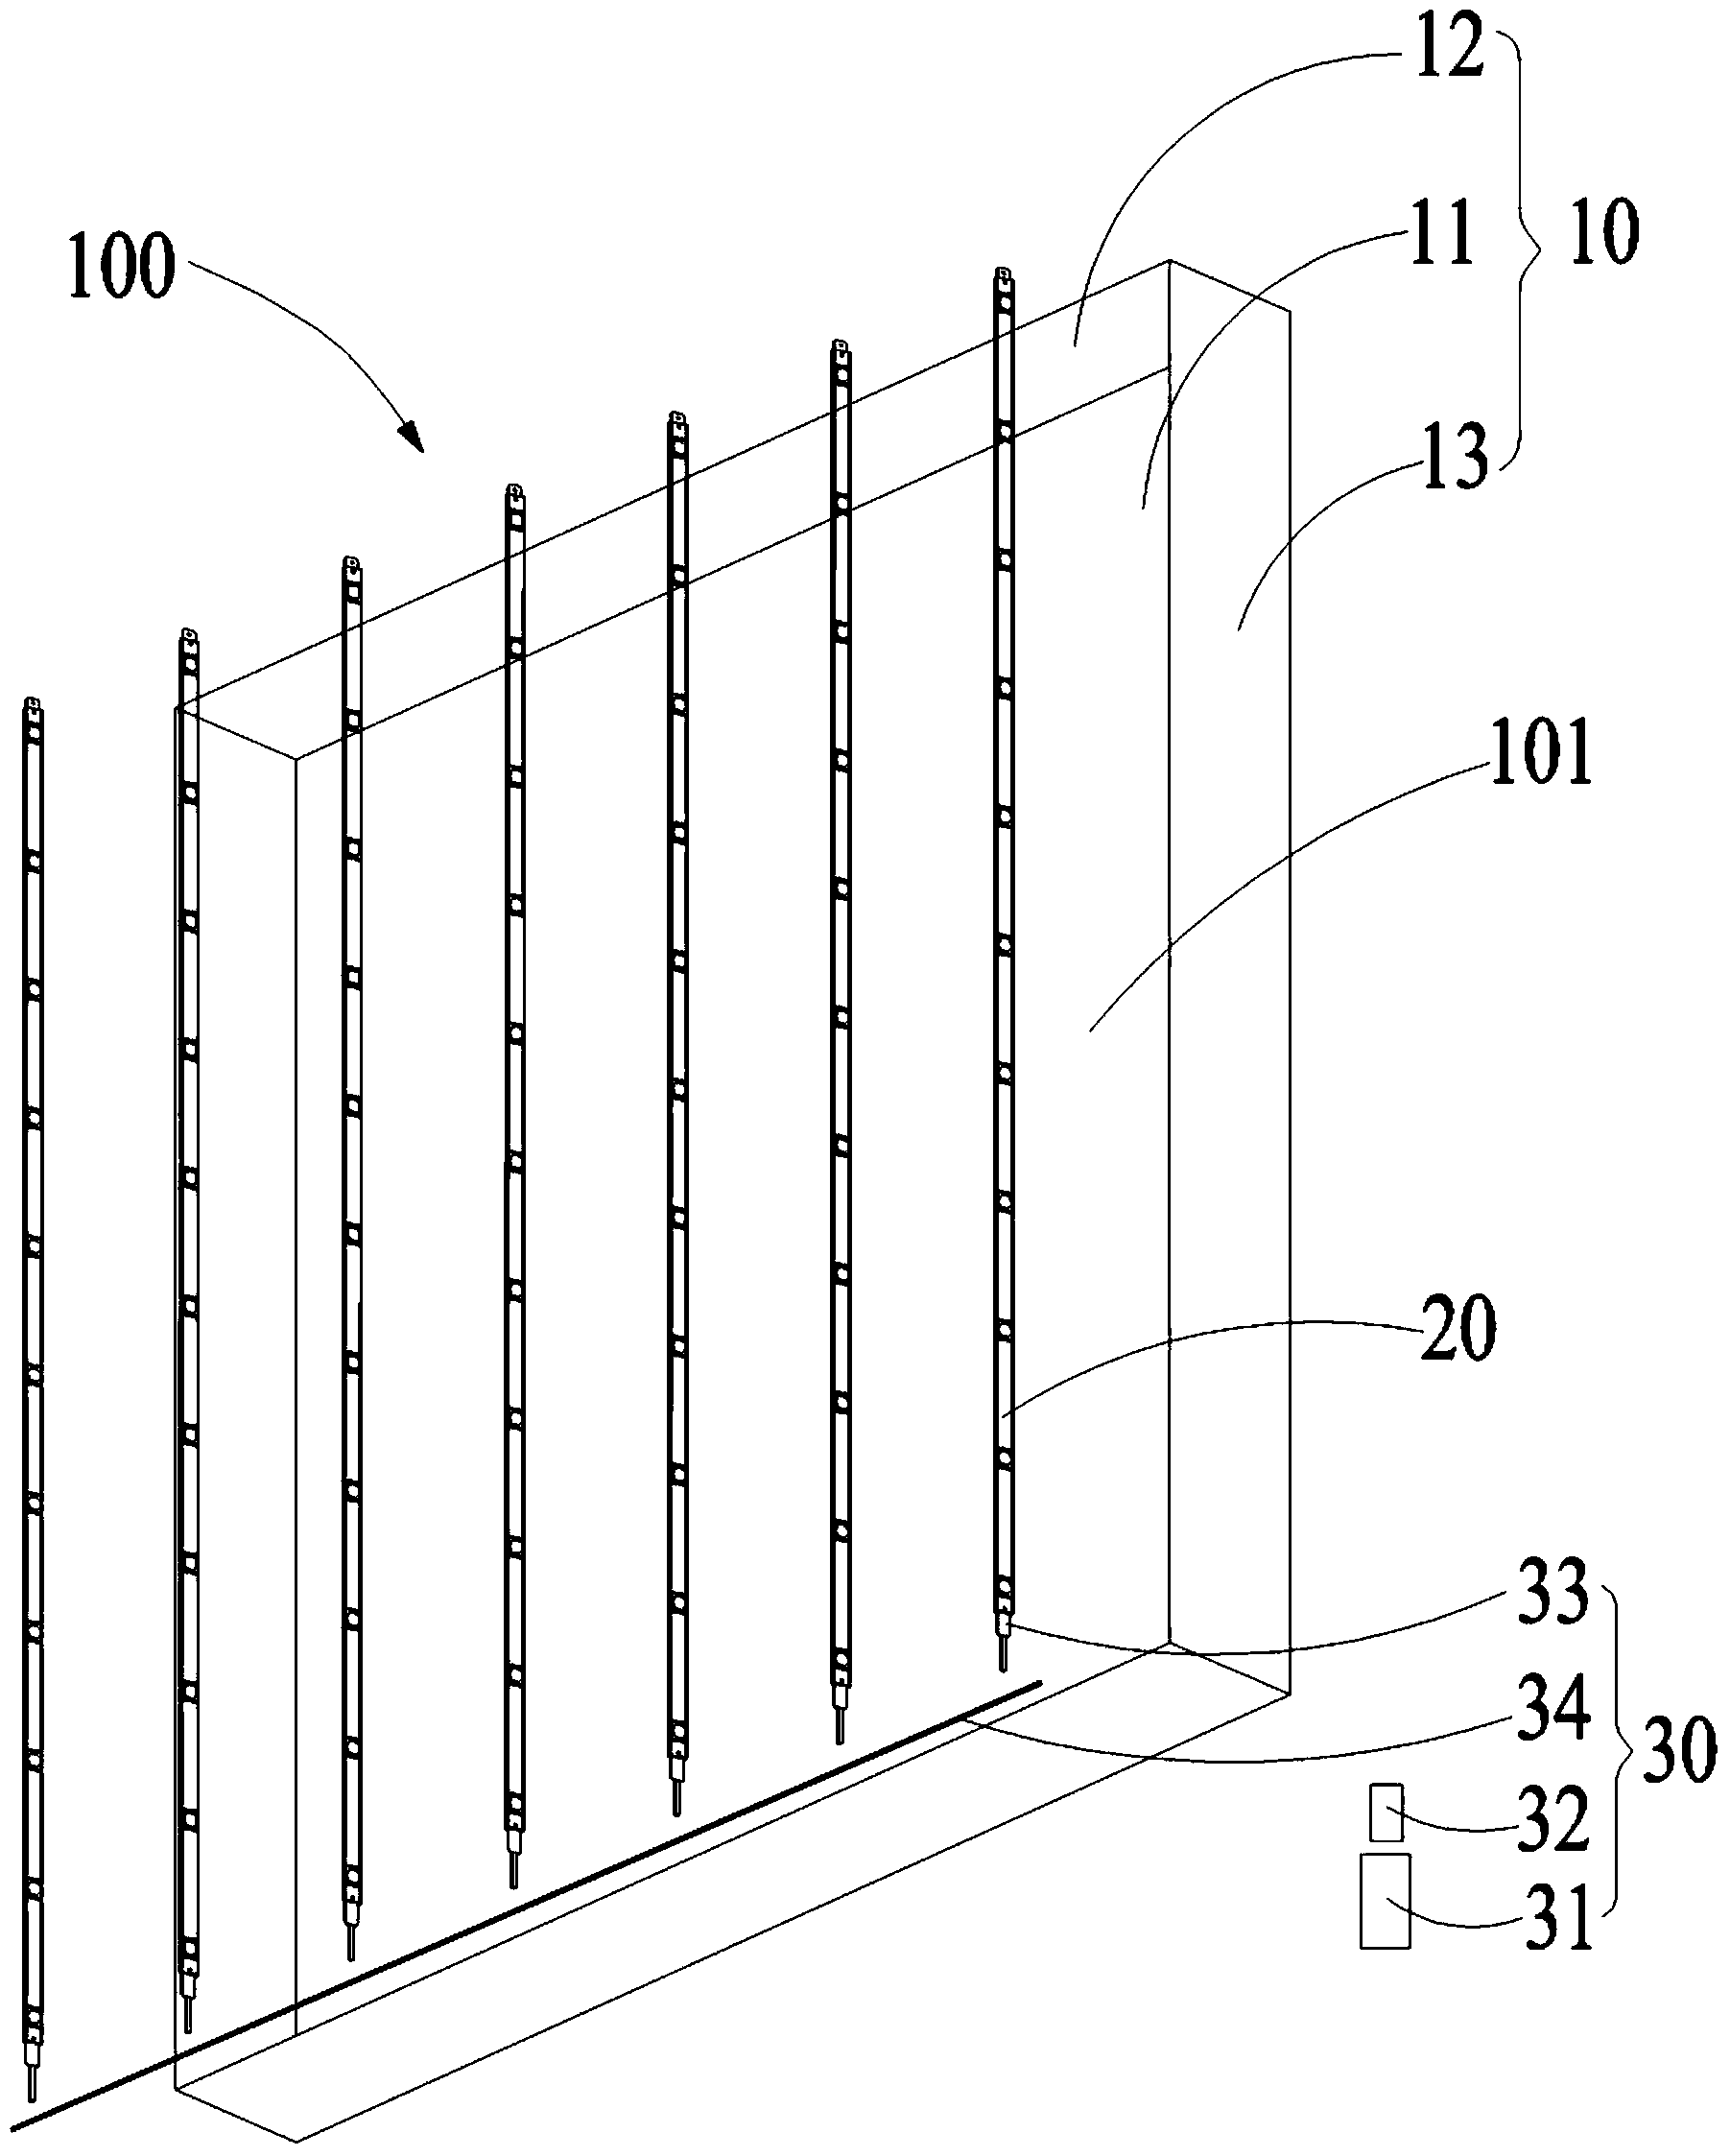 Advertising lamp box disassembly and assembly method